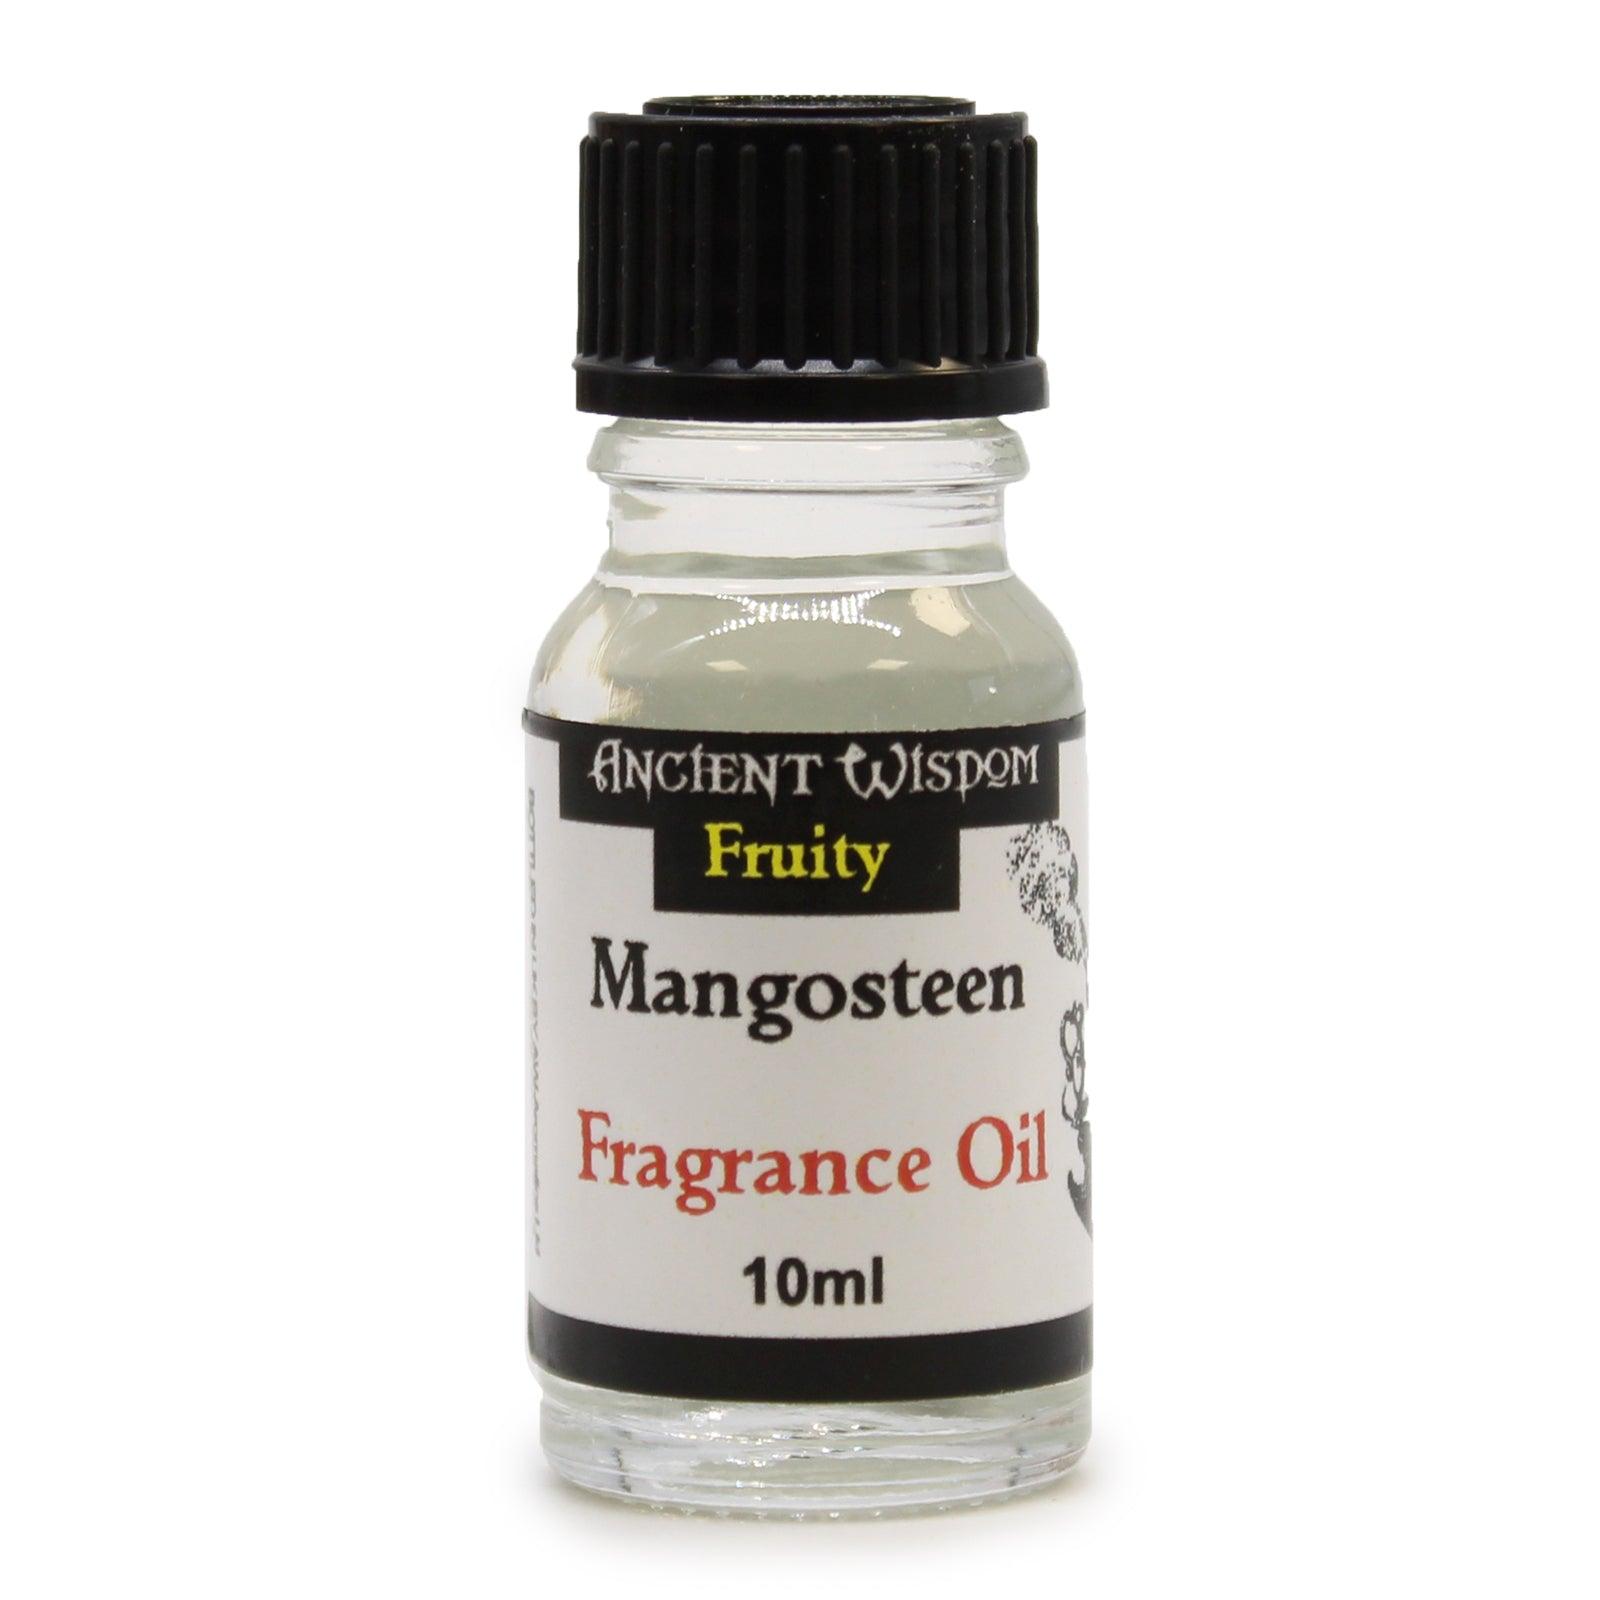 Mangosteen Fragrance Oil 10ml - Charming Spaces